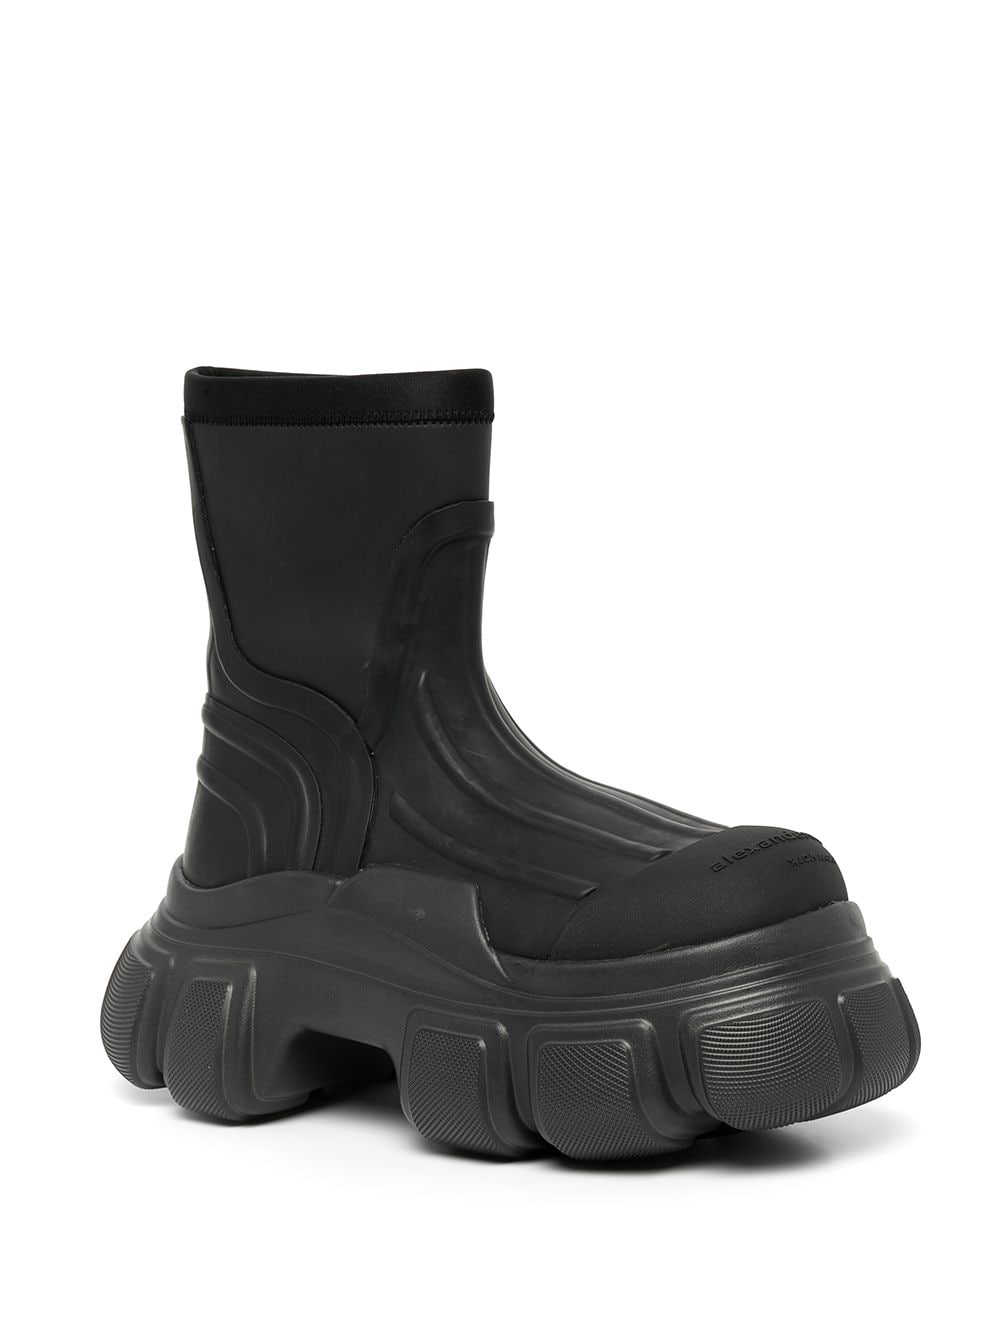 Alexander Wang Storm 85mm Chunky Ankle Boots - Farfetch